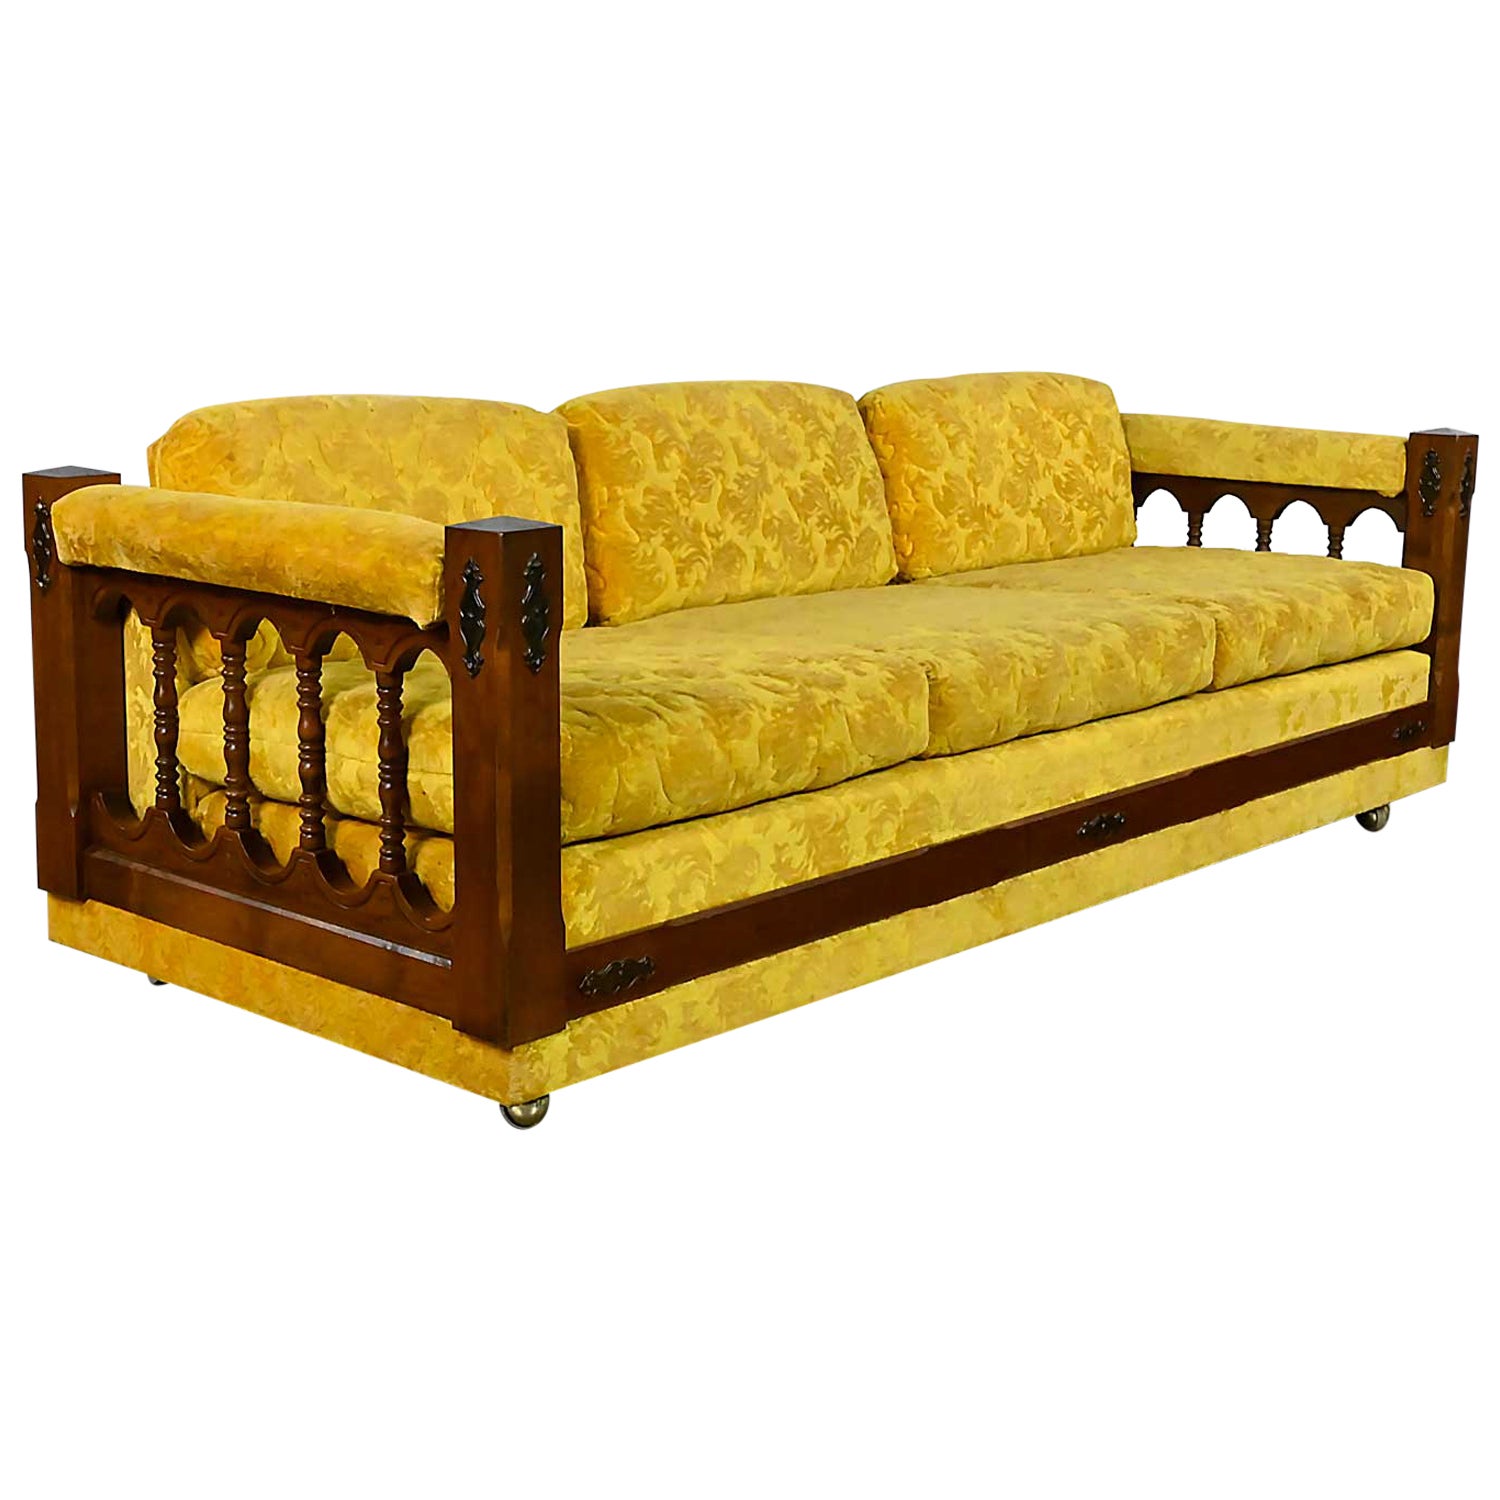 Vintage Spanish Revival Gold Textured Fabric Sofa Turned with Spindle Sides